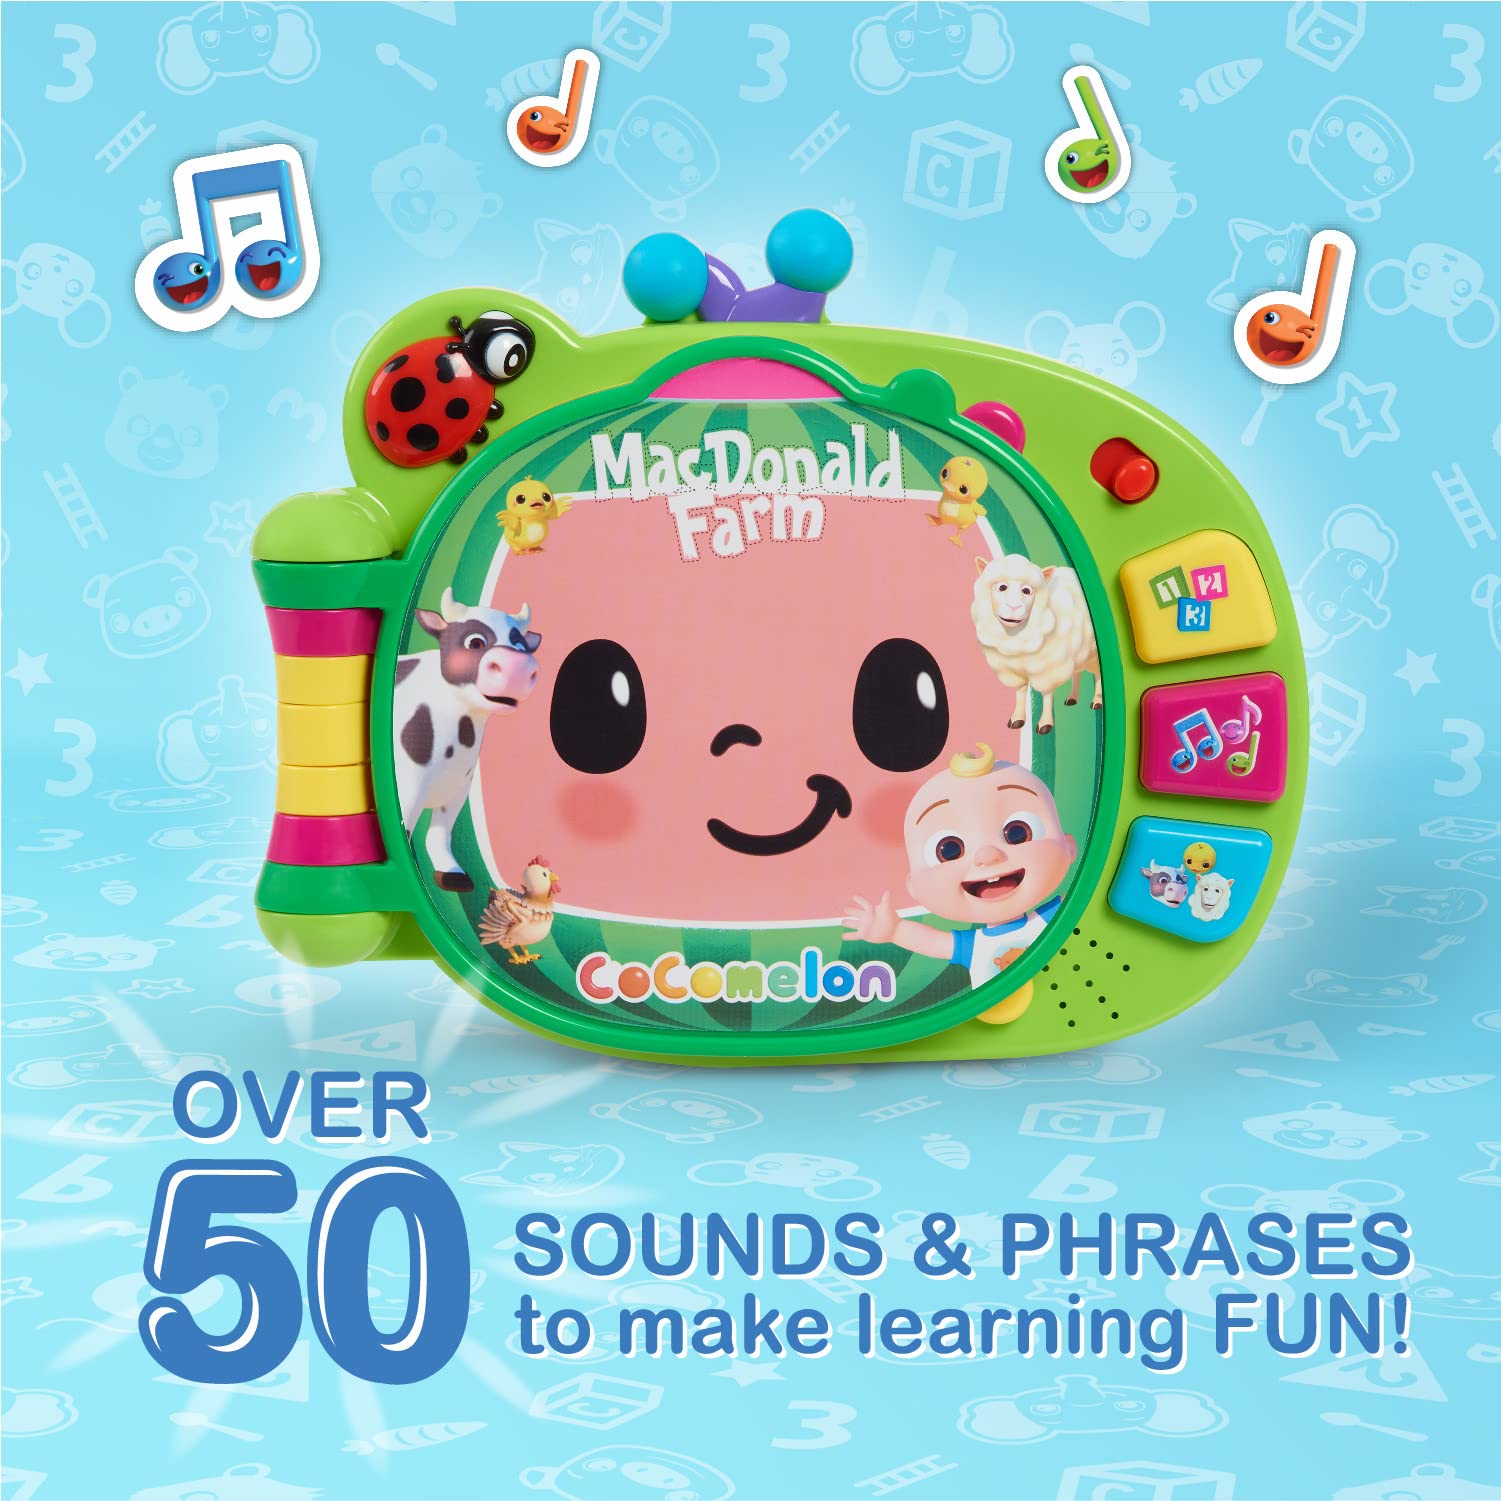 CoComelon Learning Book Interactive Toy for Toddlers with 3 Learning Modes, Music, 50 Learning Phrases, Officially Licensed Kids Toys for Ages 18 Month by Just Play